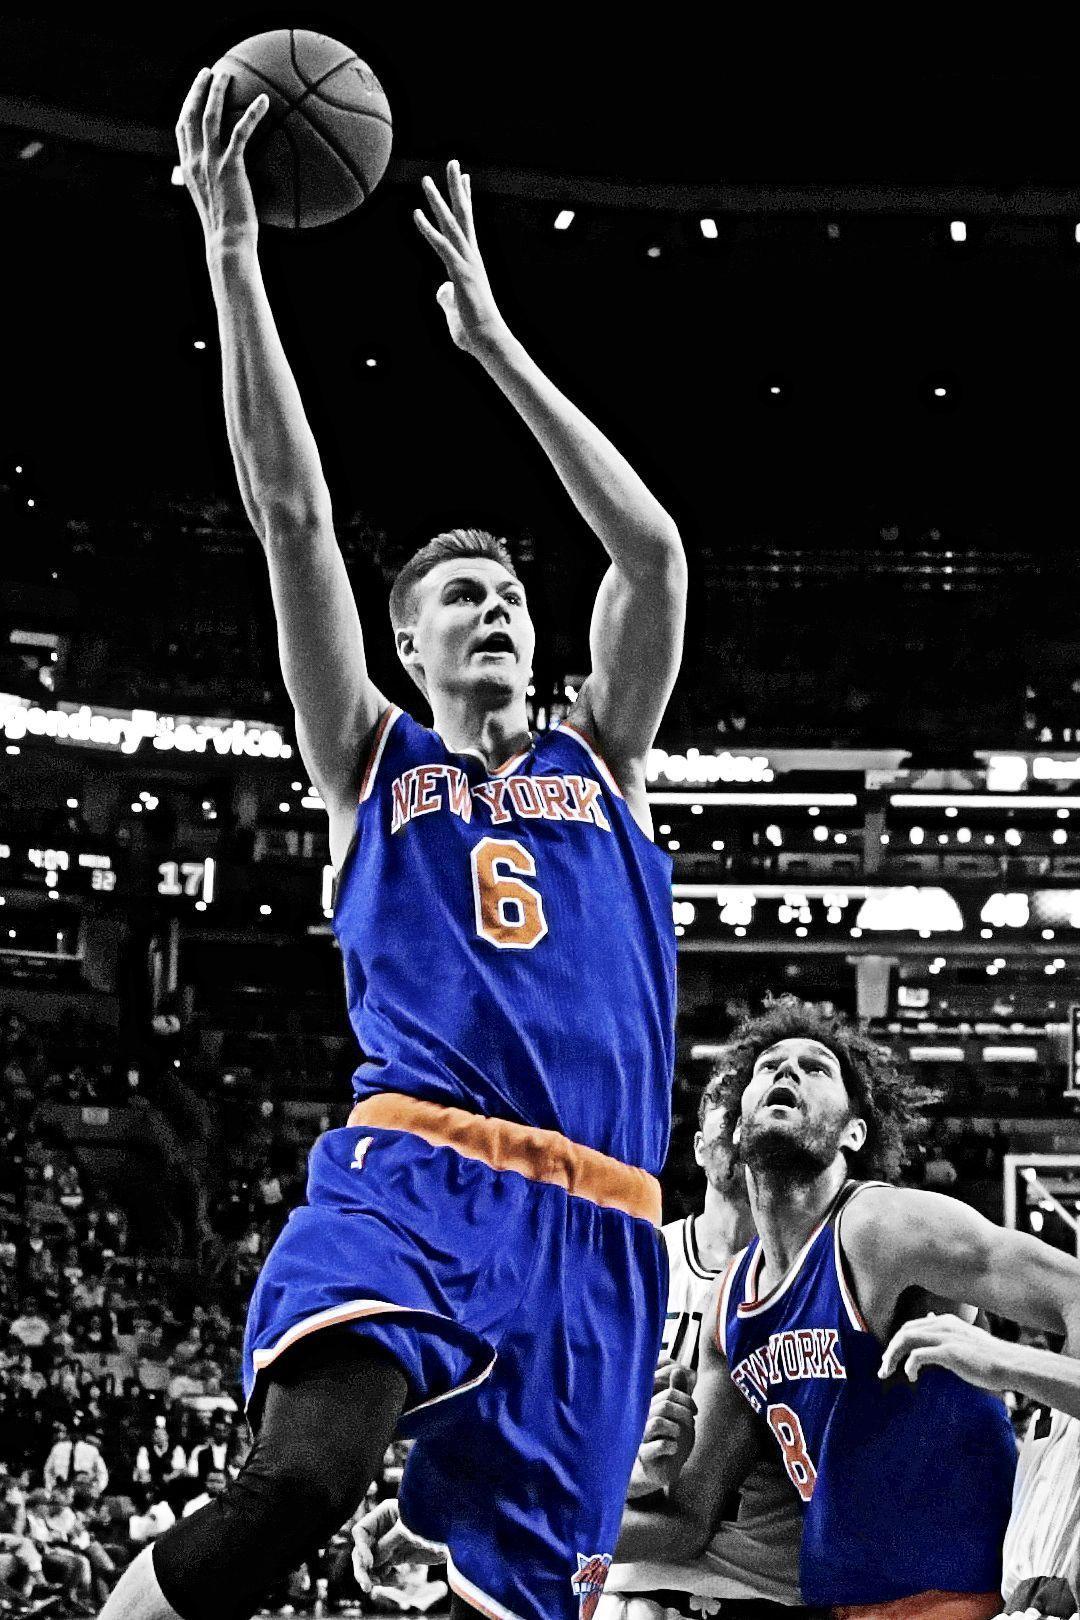 kristaps iphone wallpaper (1080x1920) Thought i'd share